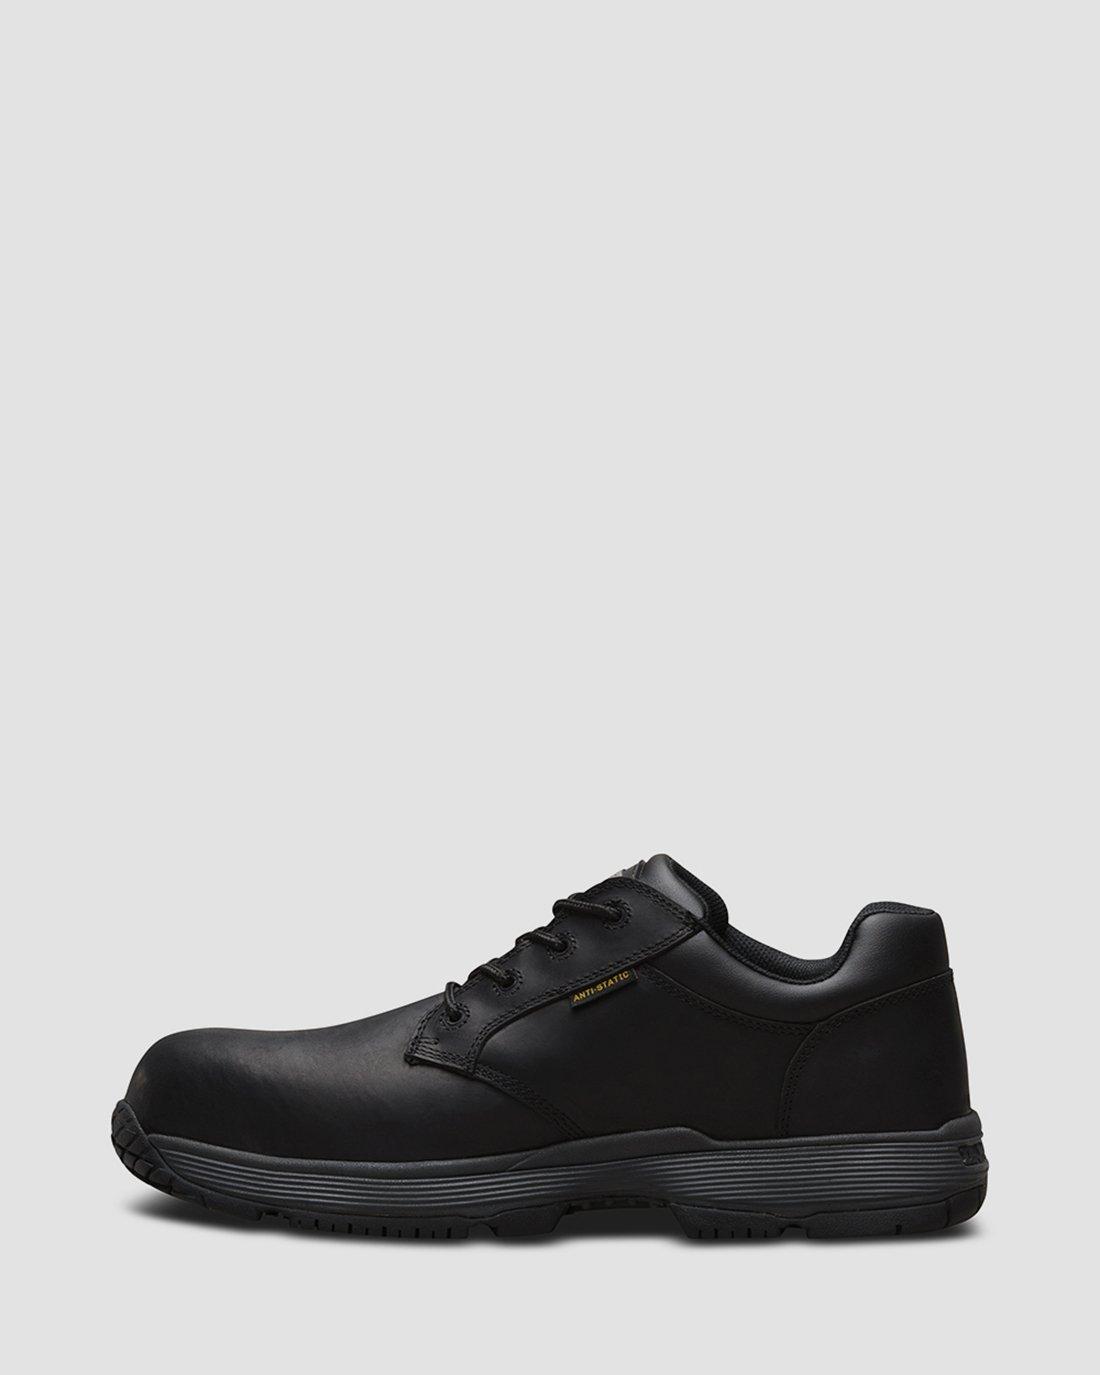 LINNET SAFETY TOE | Dr. Martens Official